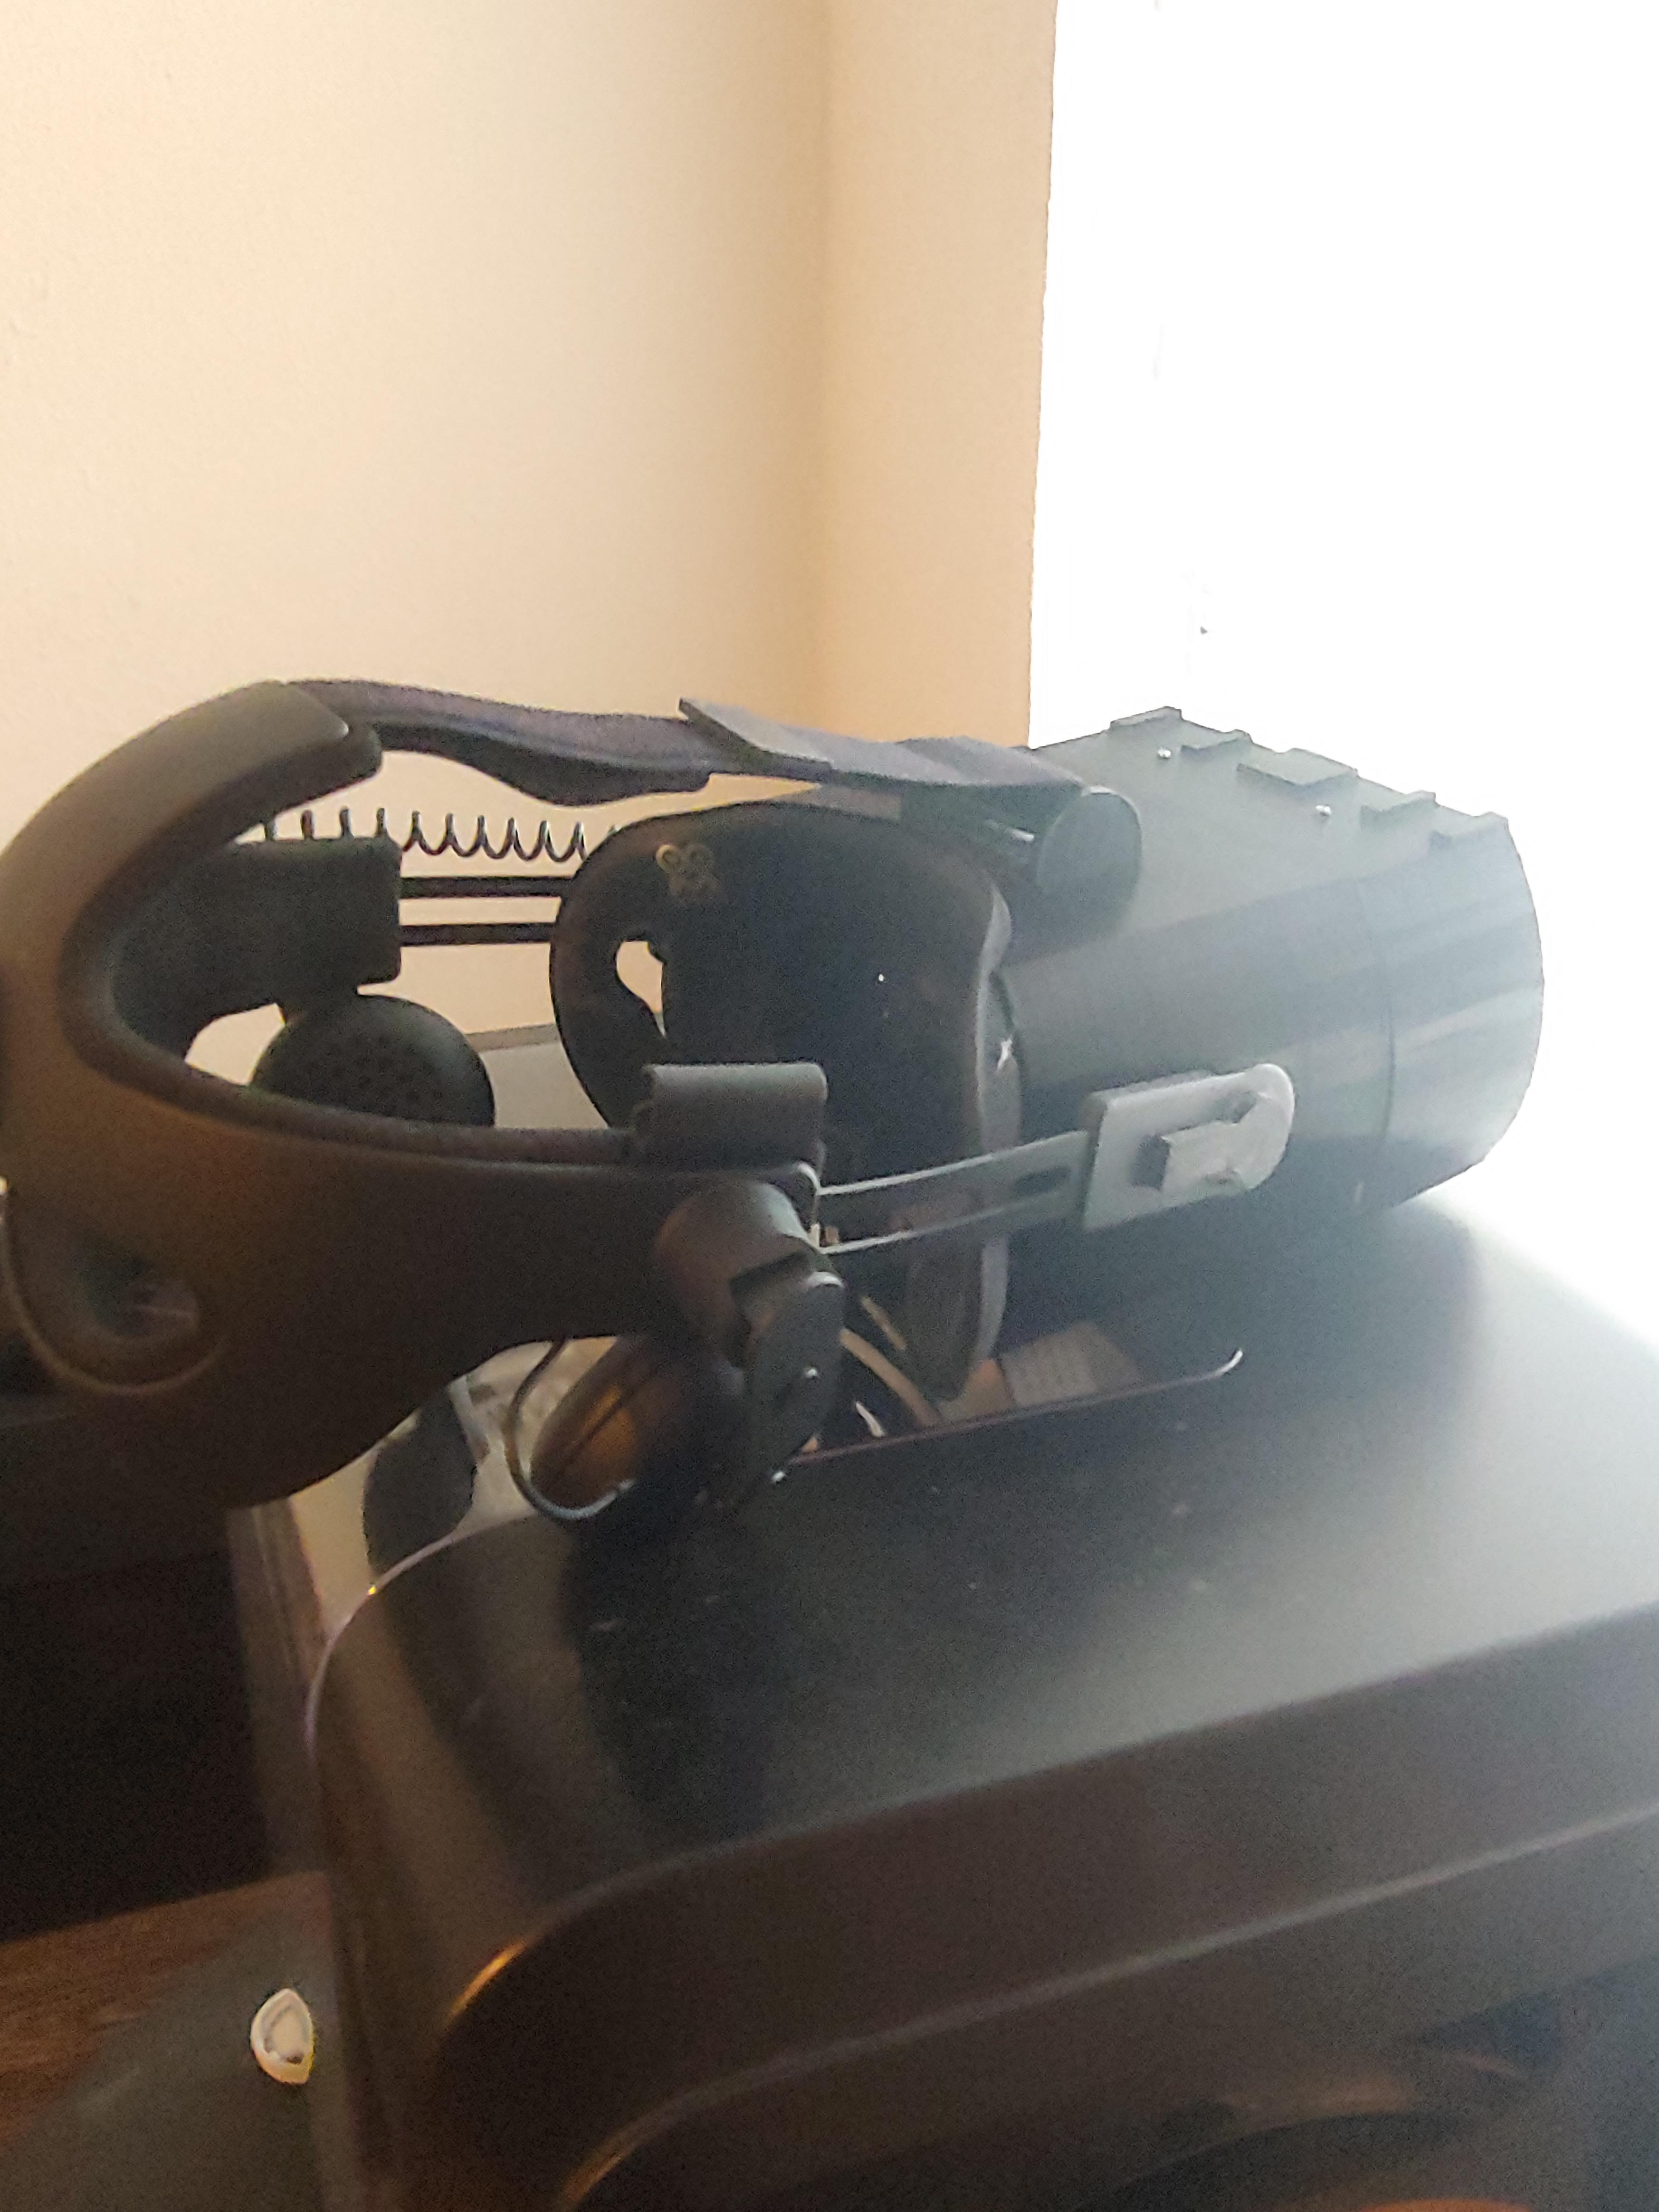 Mix Reality Headset With Machine Learning